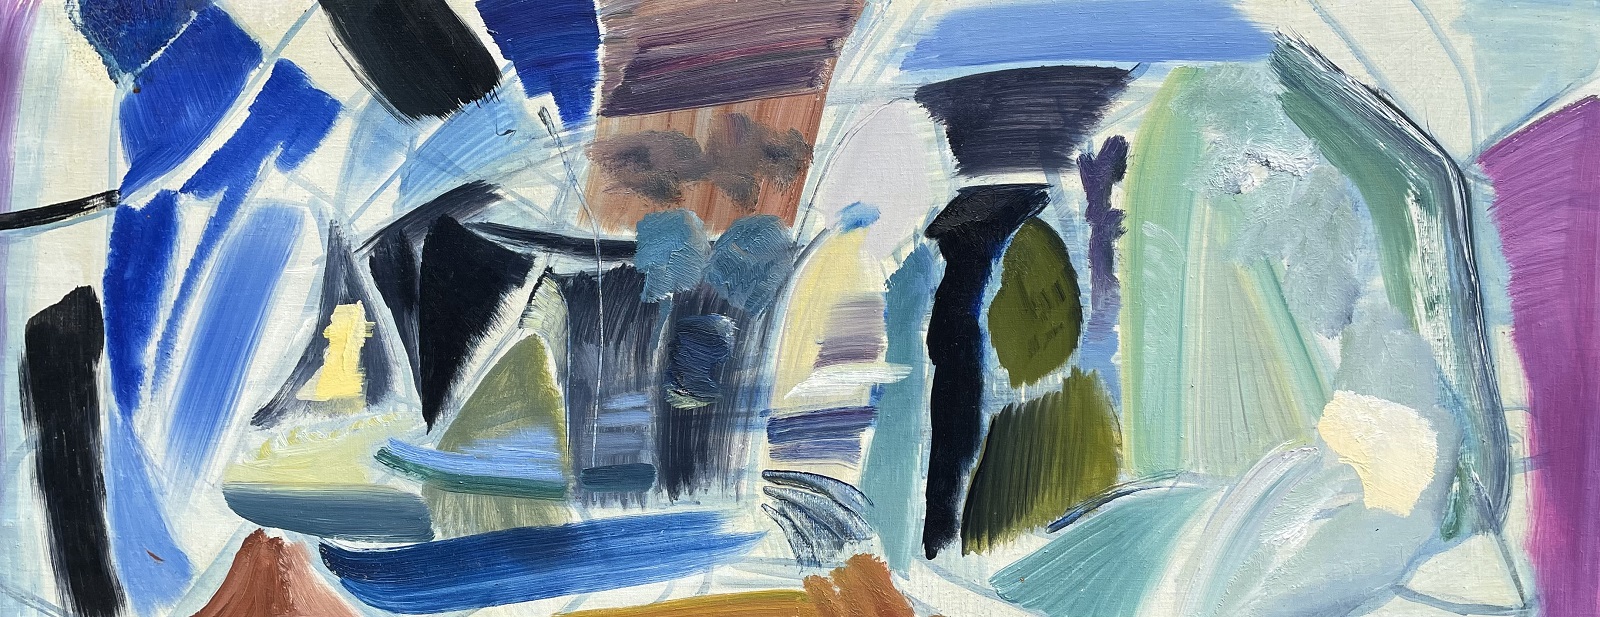 Ivon Hitchens, August Painting (detail), 1973. Courtesy of Alan Wheatley Art